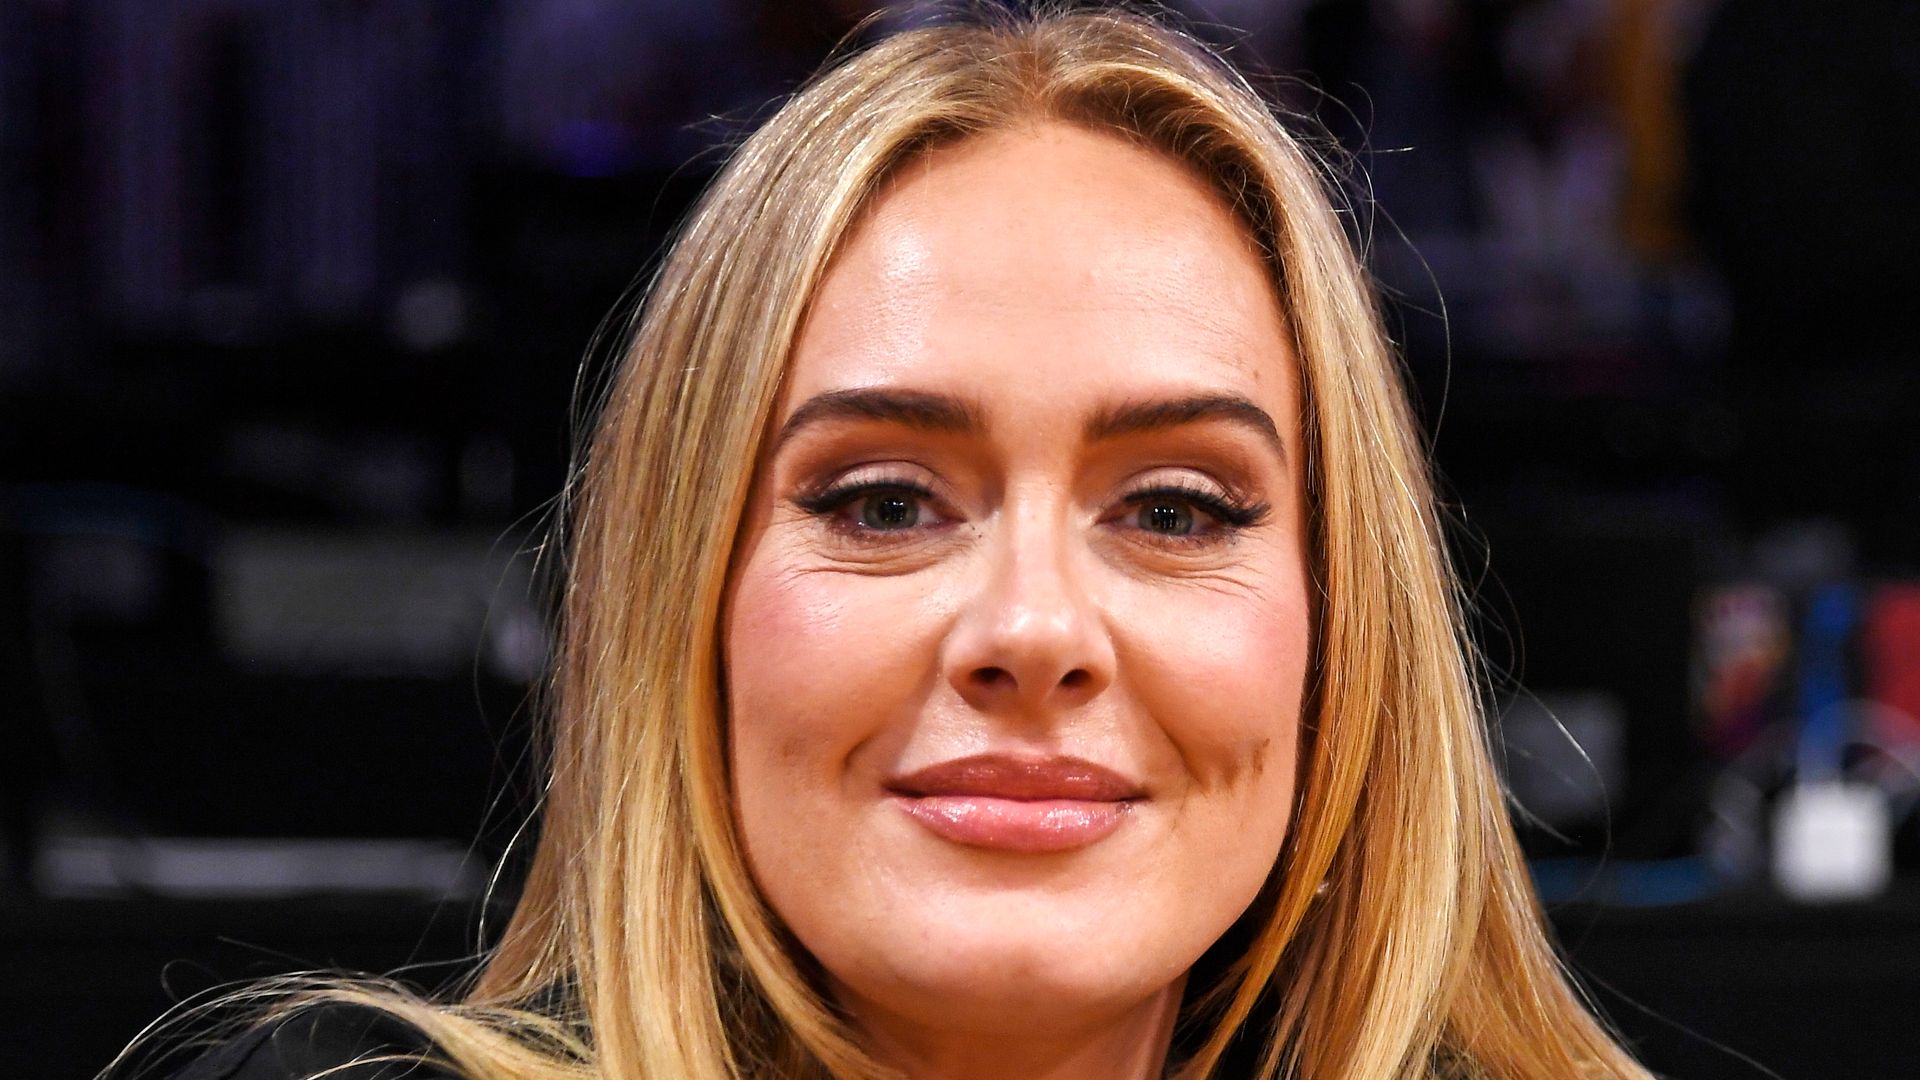 Adele attends game three of the Western Conference Finals between the Los Angeles Lakers and the Denver Nuggets at Crypto.com Arena on May 20, 2023 in Los Angeles, California